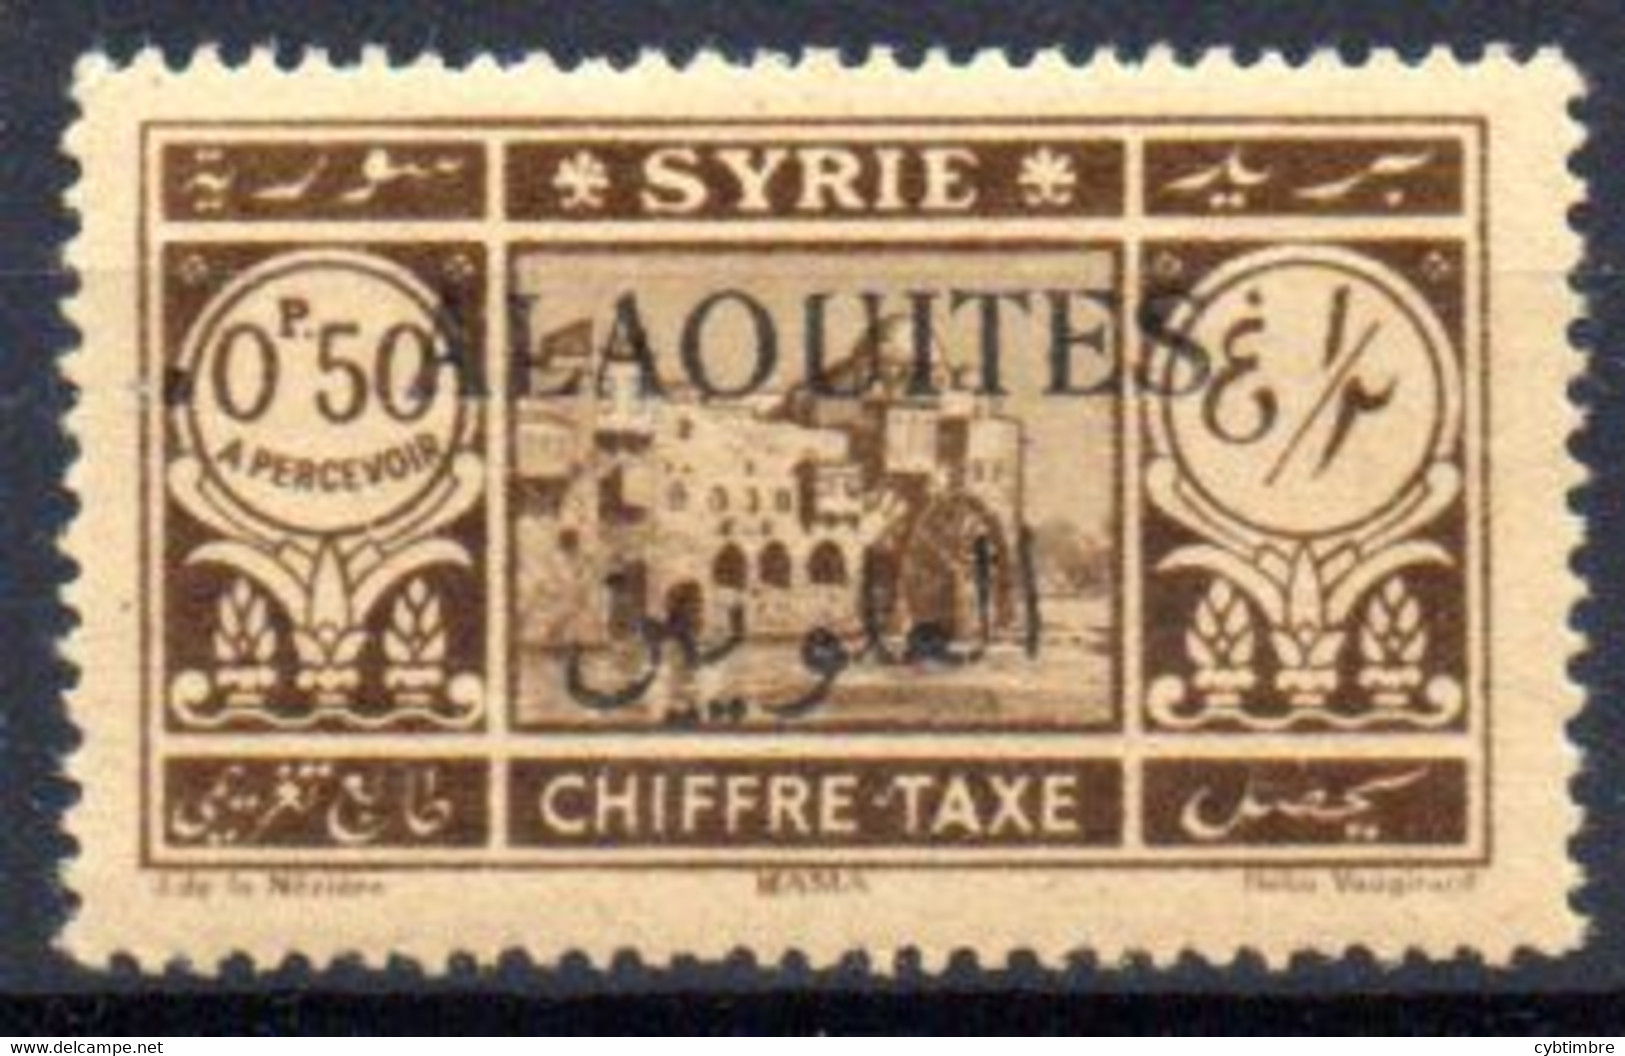 Alaouites: Yvert N° Taxe 6**; MNH - Unused Stamps